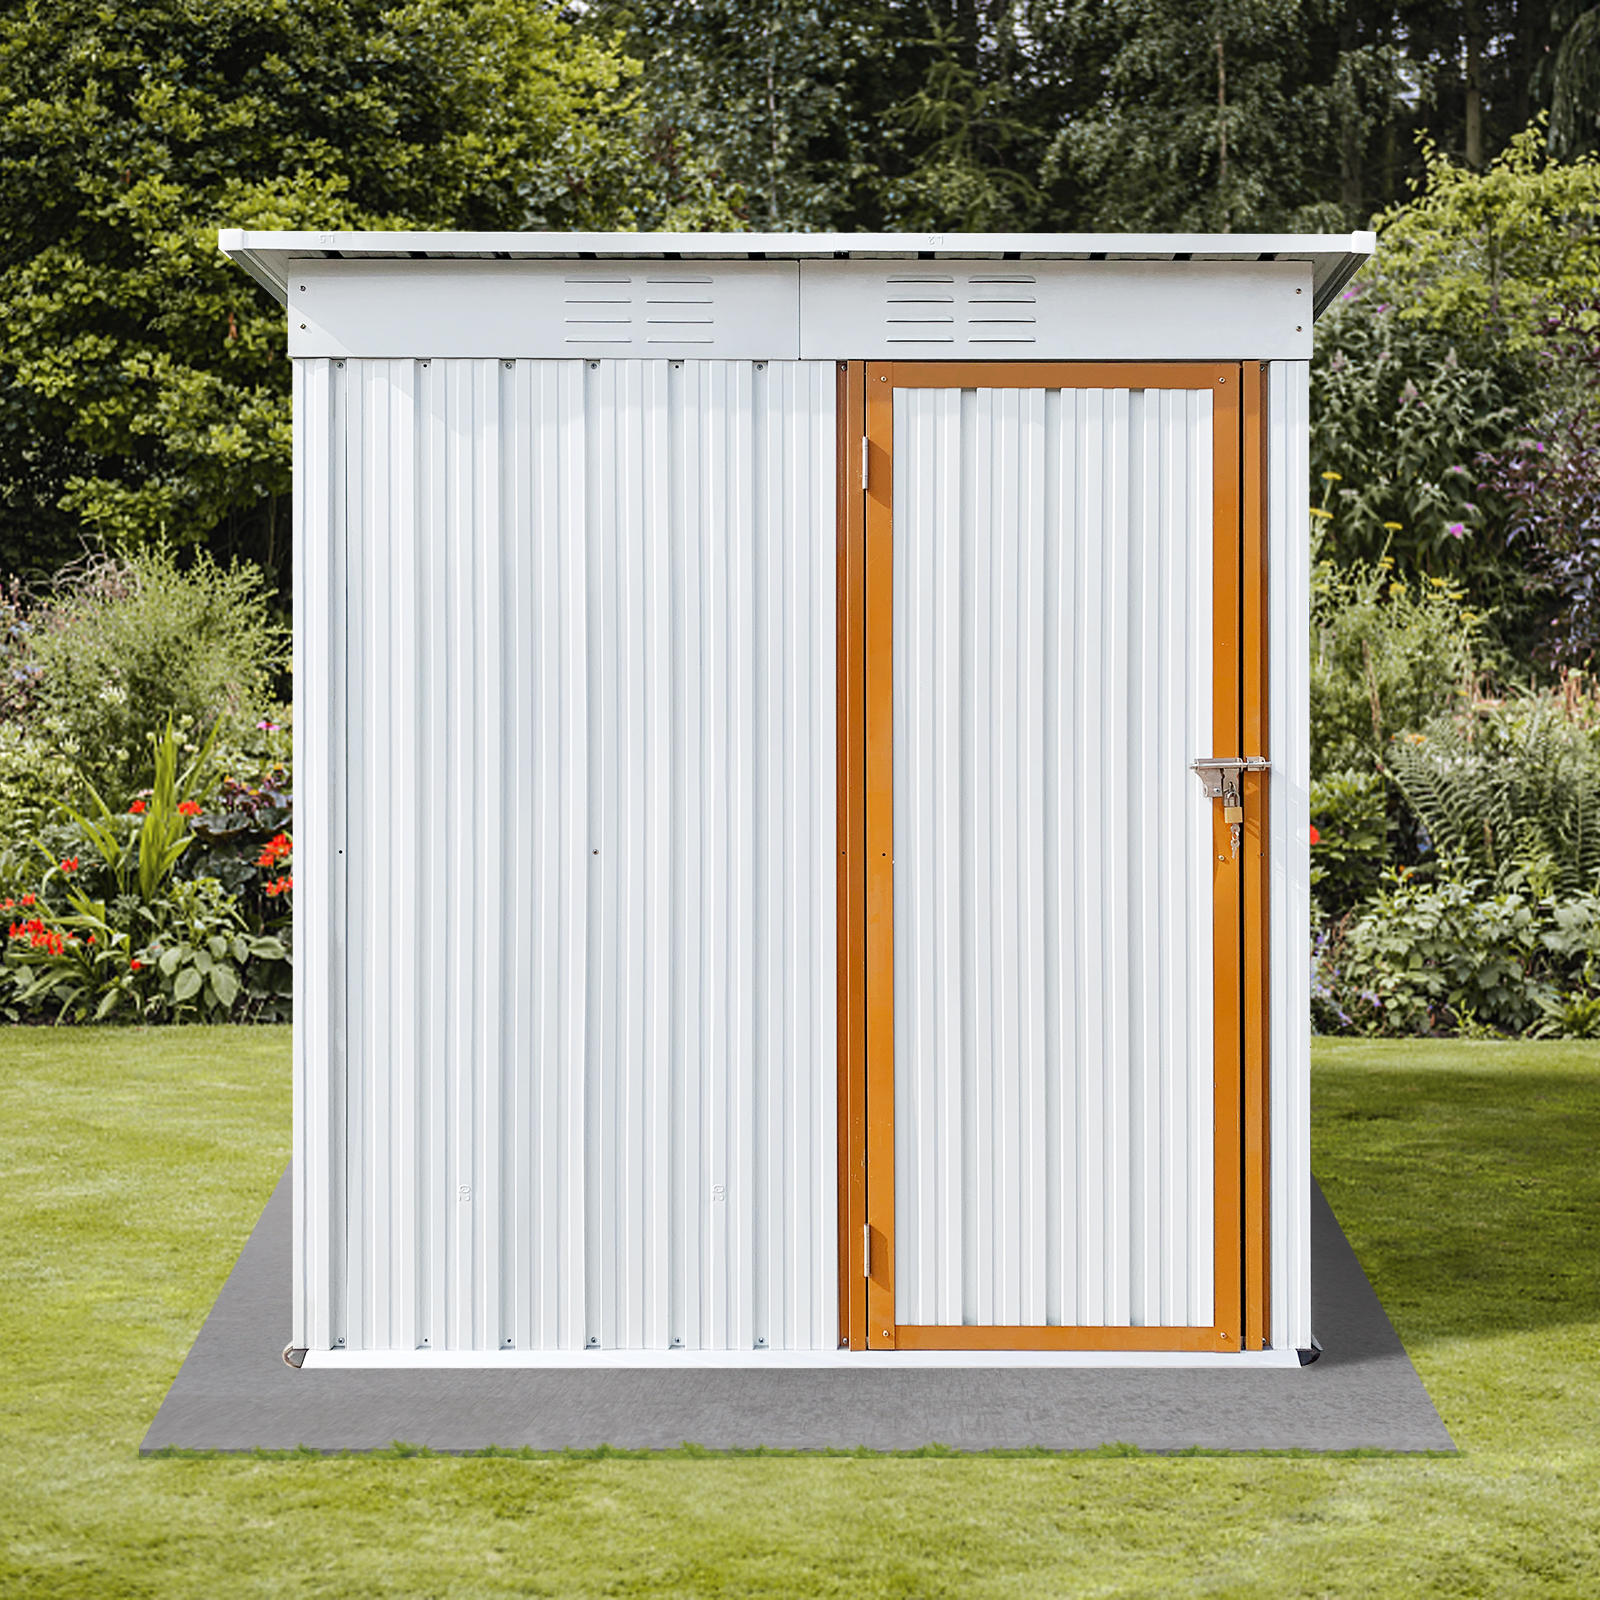 Metal Storage Shed, Seizeen 5 x 3Ft All-Weather Garden Storage Sheds with Lockable Door, Outdoor Metal Shed Patio Storage for Backyard Garden Lawn, White - image 3 of 9